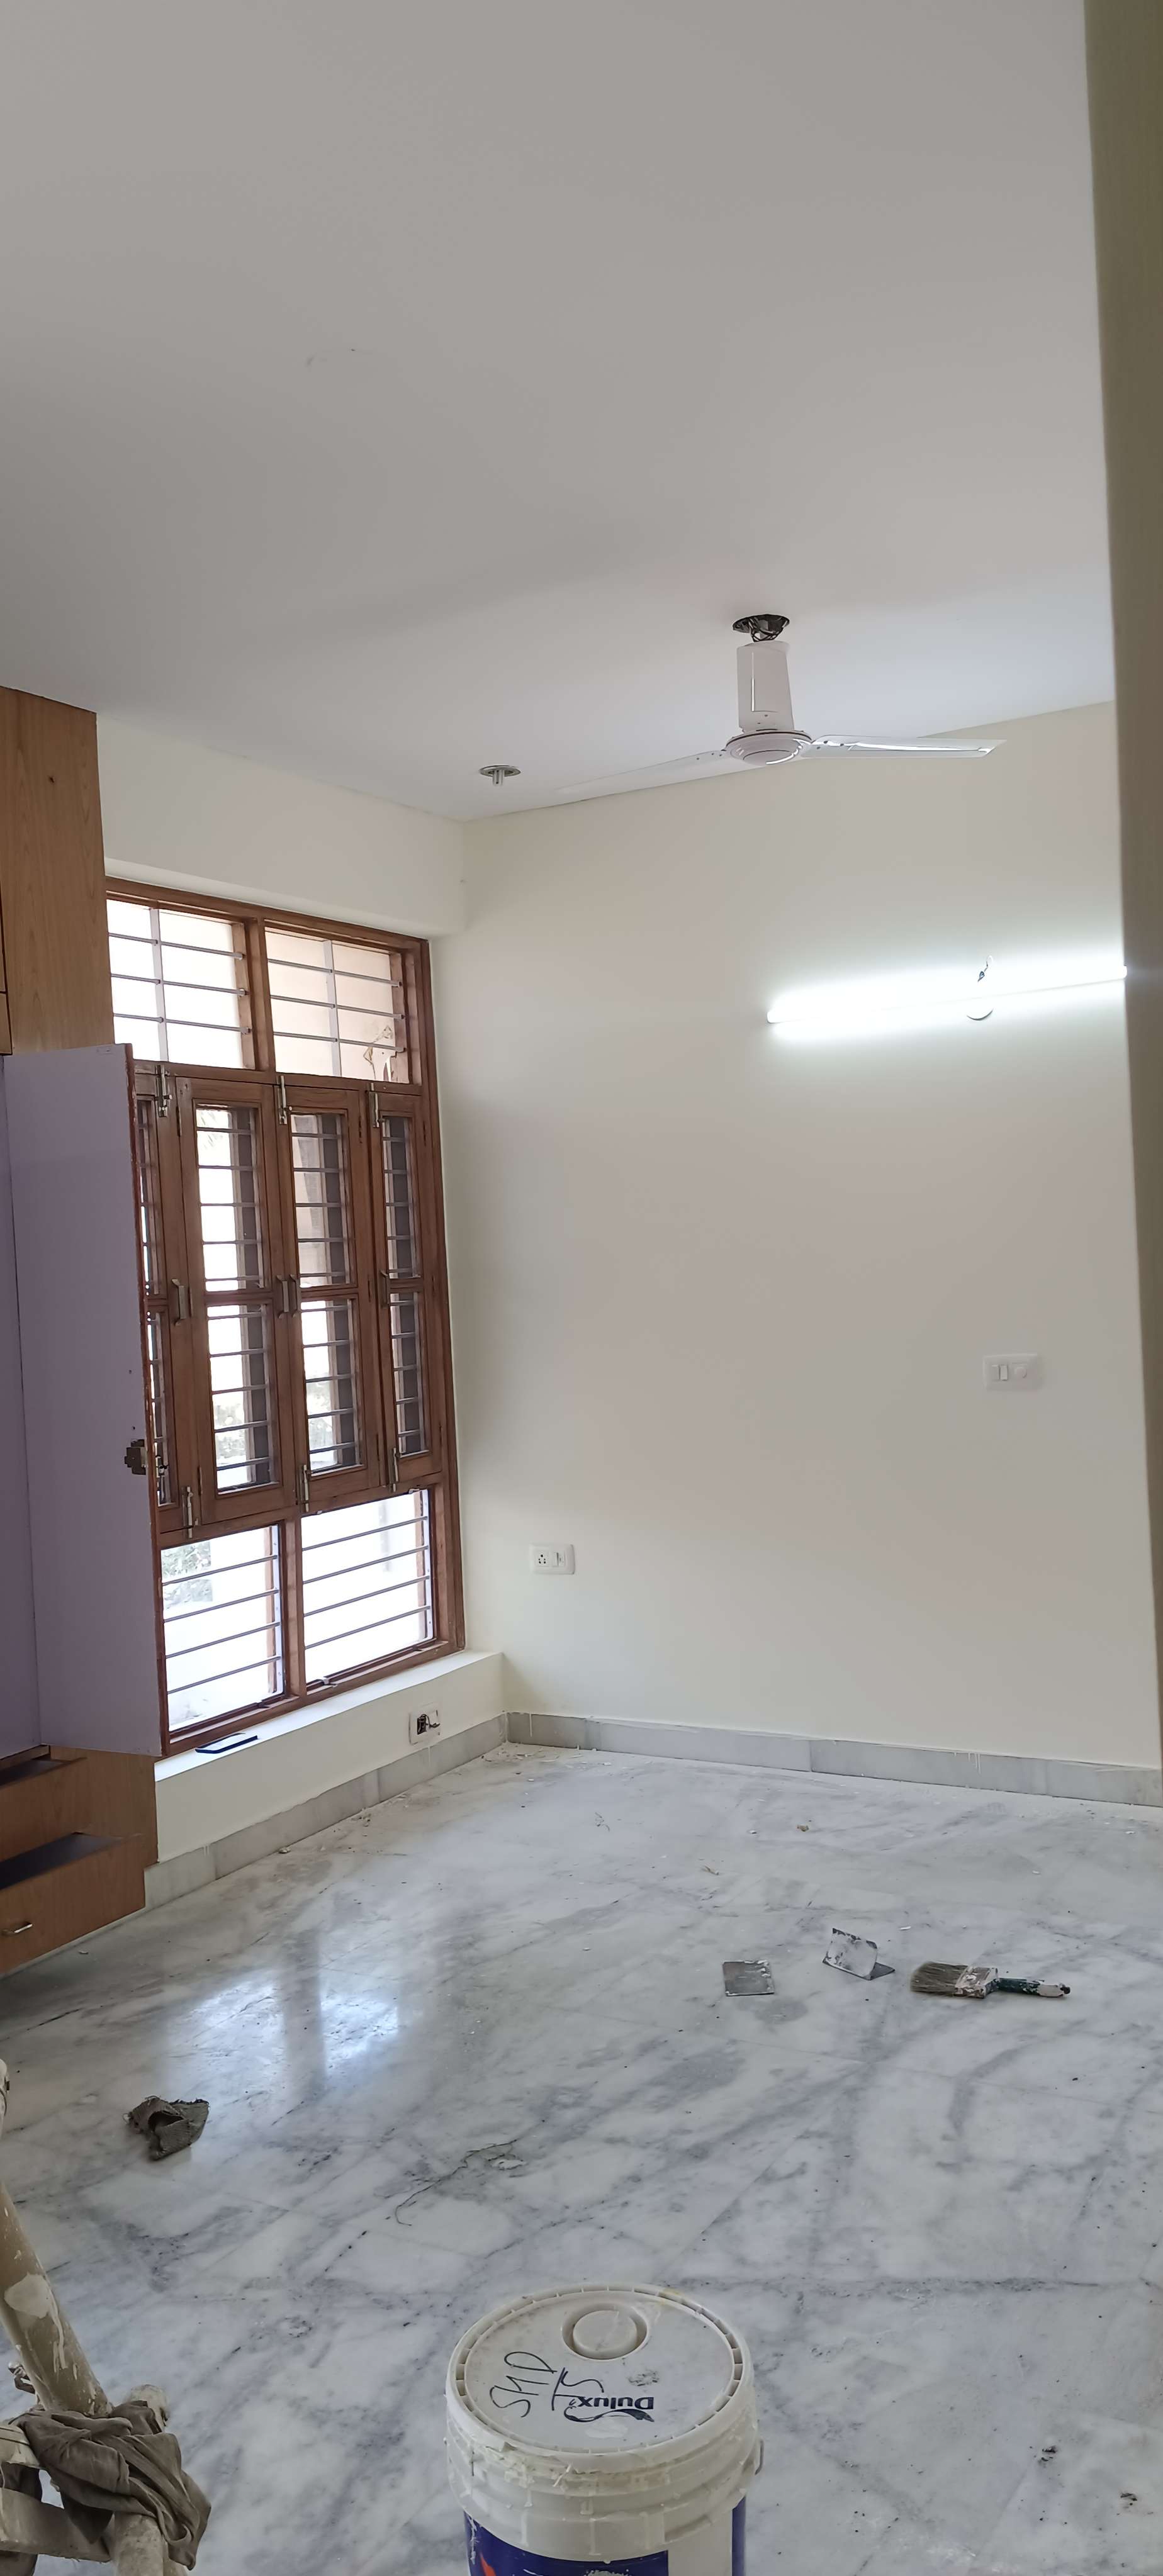 2 BHK Independent House For Rent in Sector 14 Faridabad 6414190